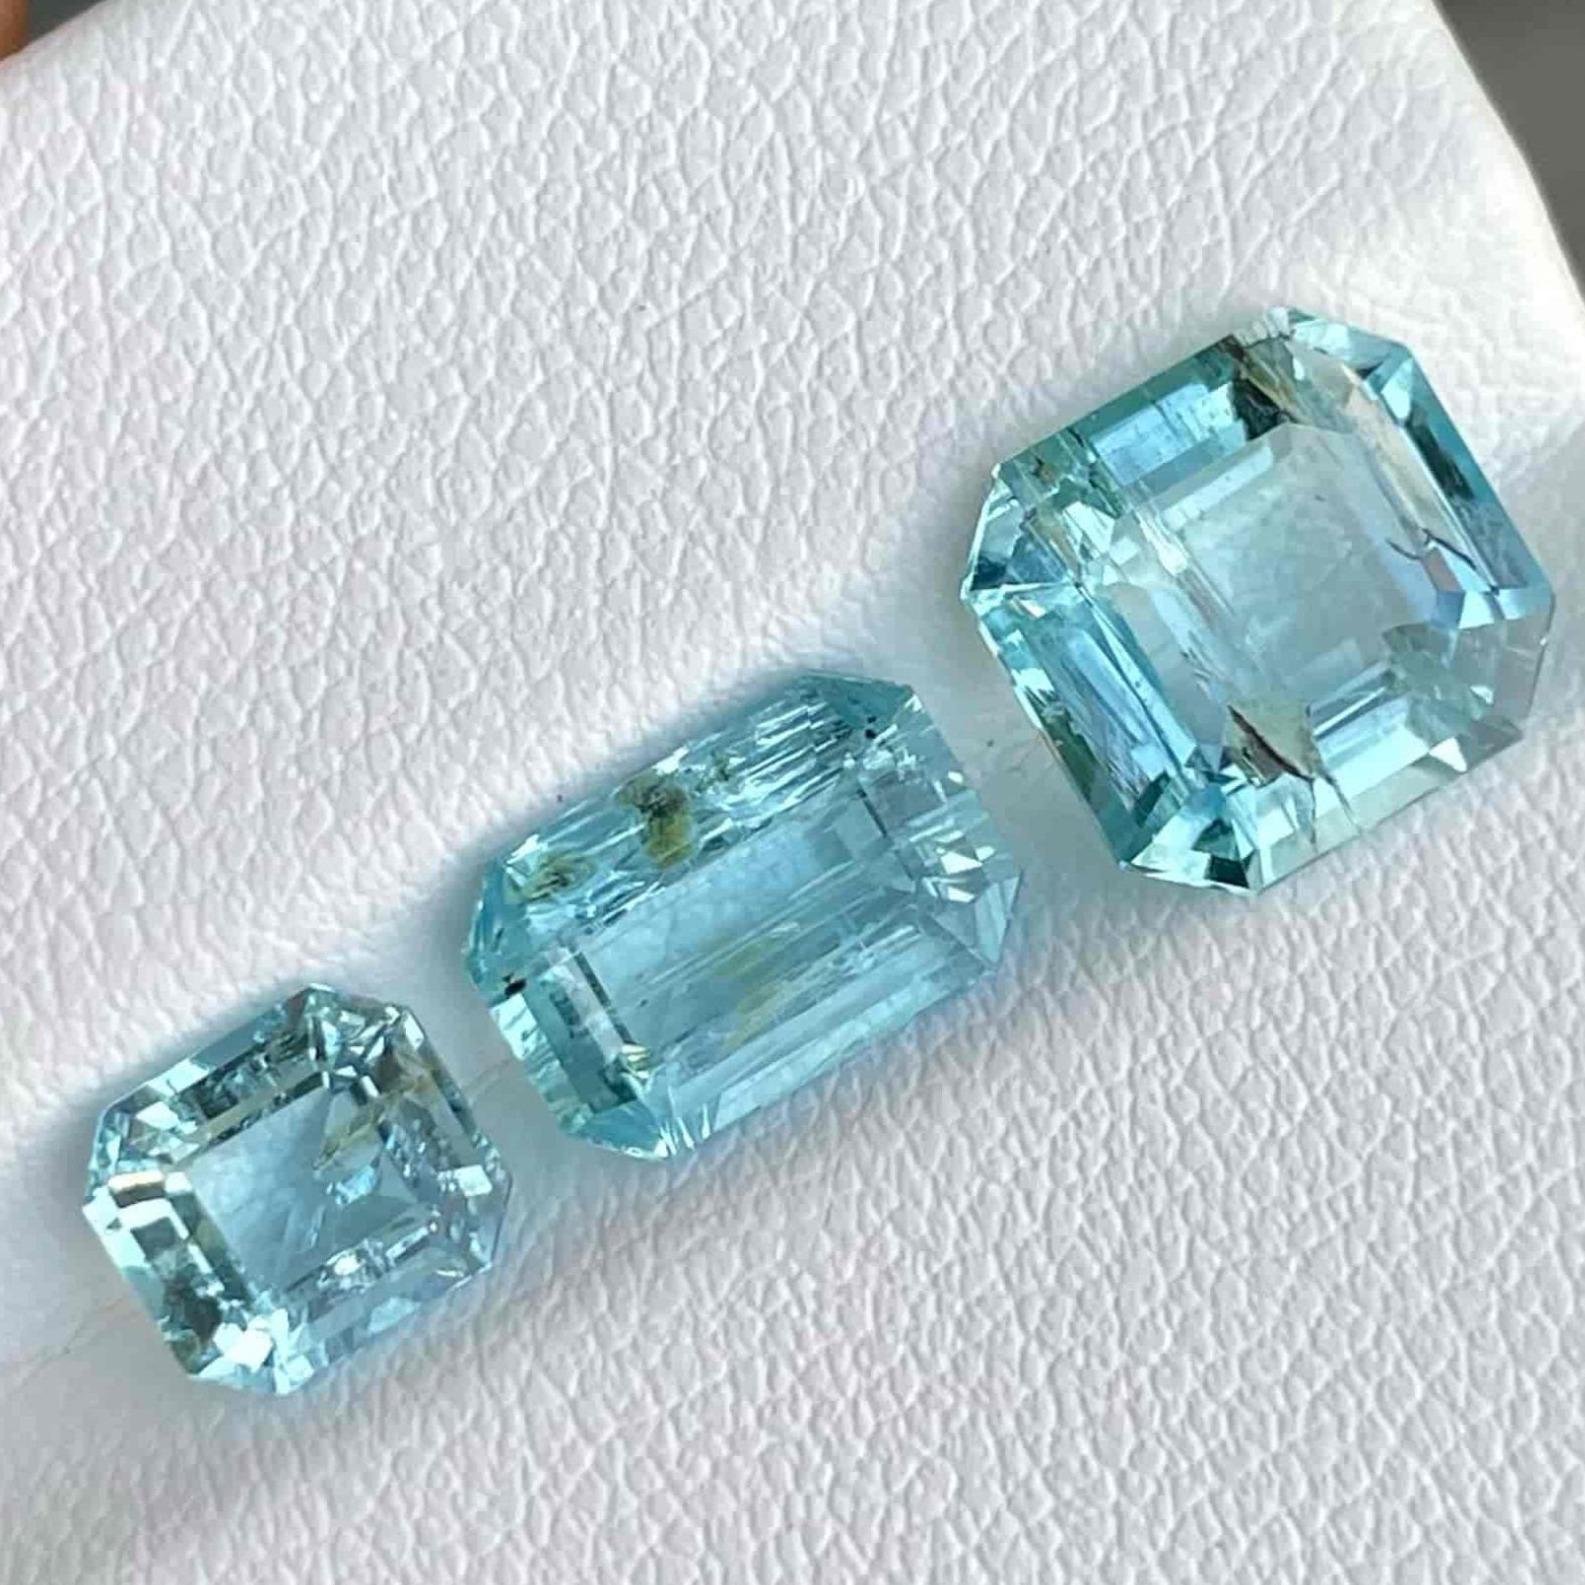 Gemstone Name Deep Blue Color Natural Aquamarine
Weight 5.96 carats
Weight Each 2.91, 1.92, and 1.11 carats
Clarity Included
Locality Namibia
Treatment None




Introducing the stunning 5.96 carats Deep Blue Color Natural Aquamarine Batch, a